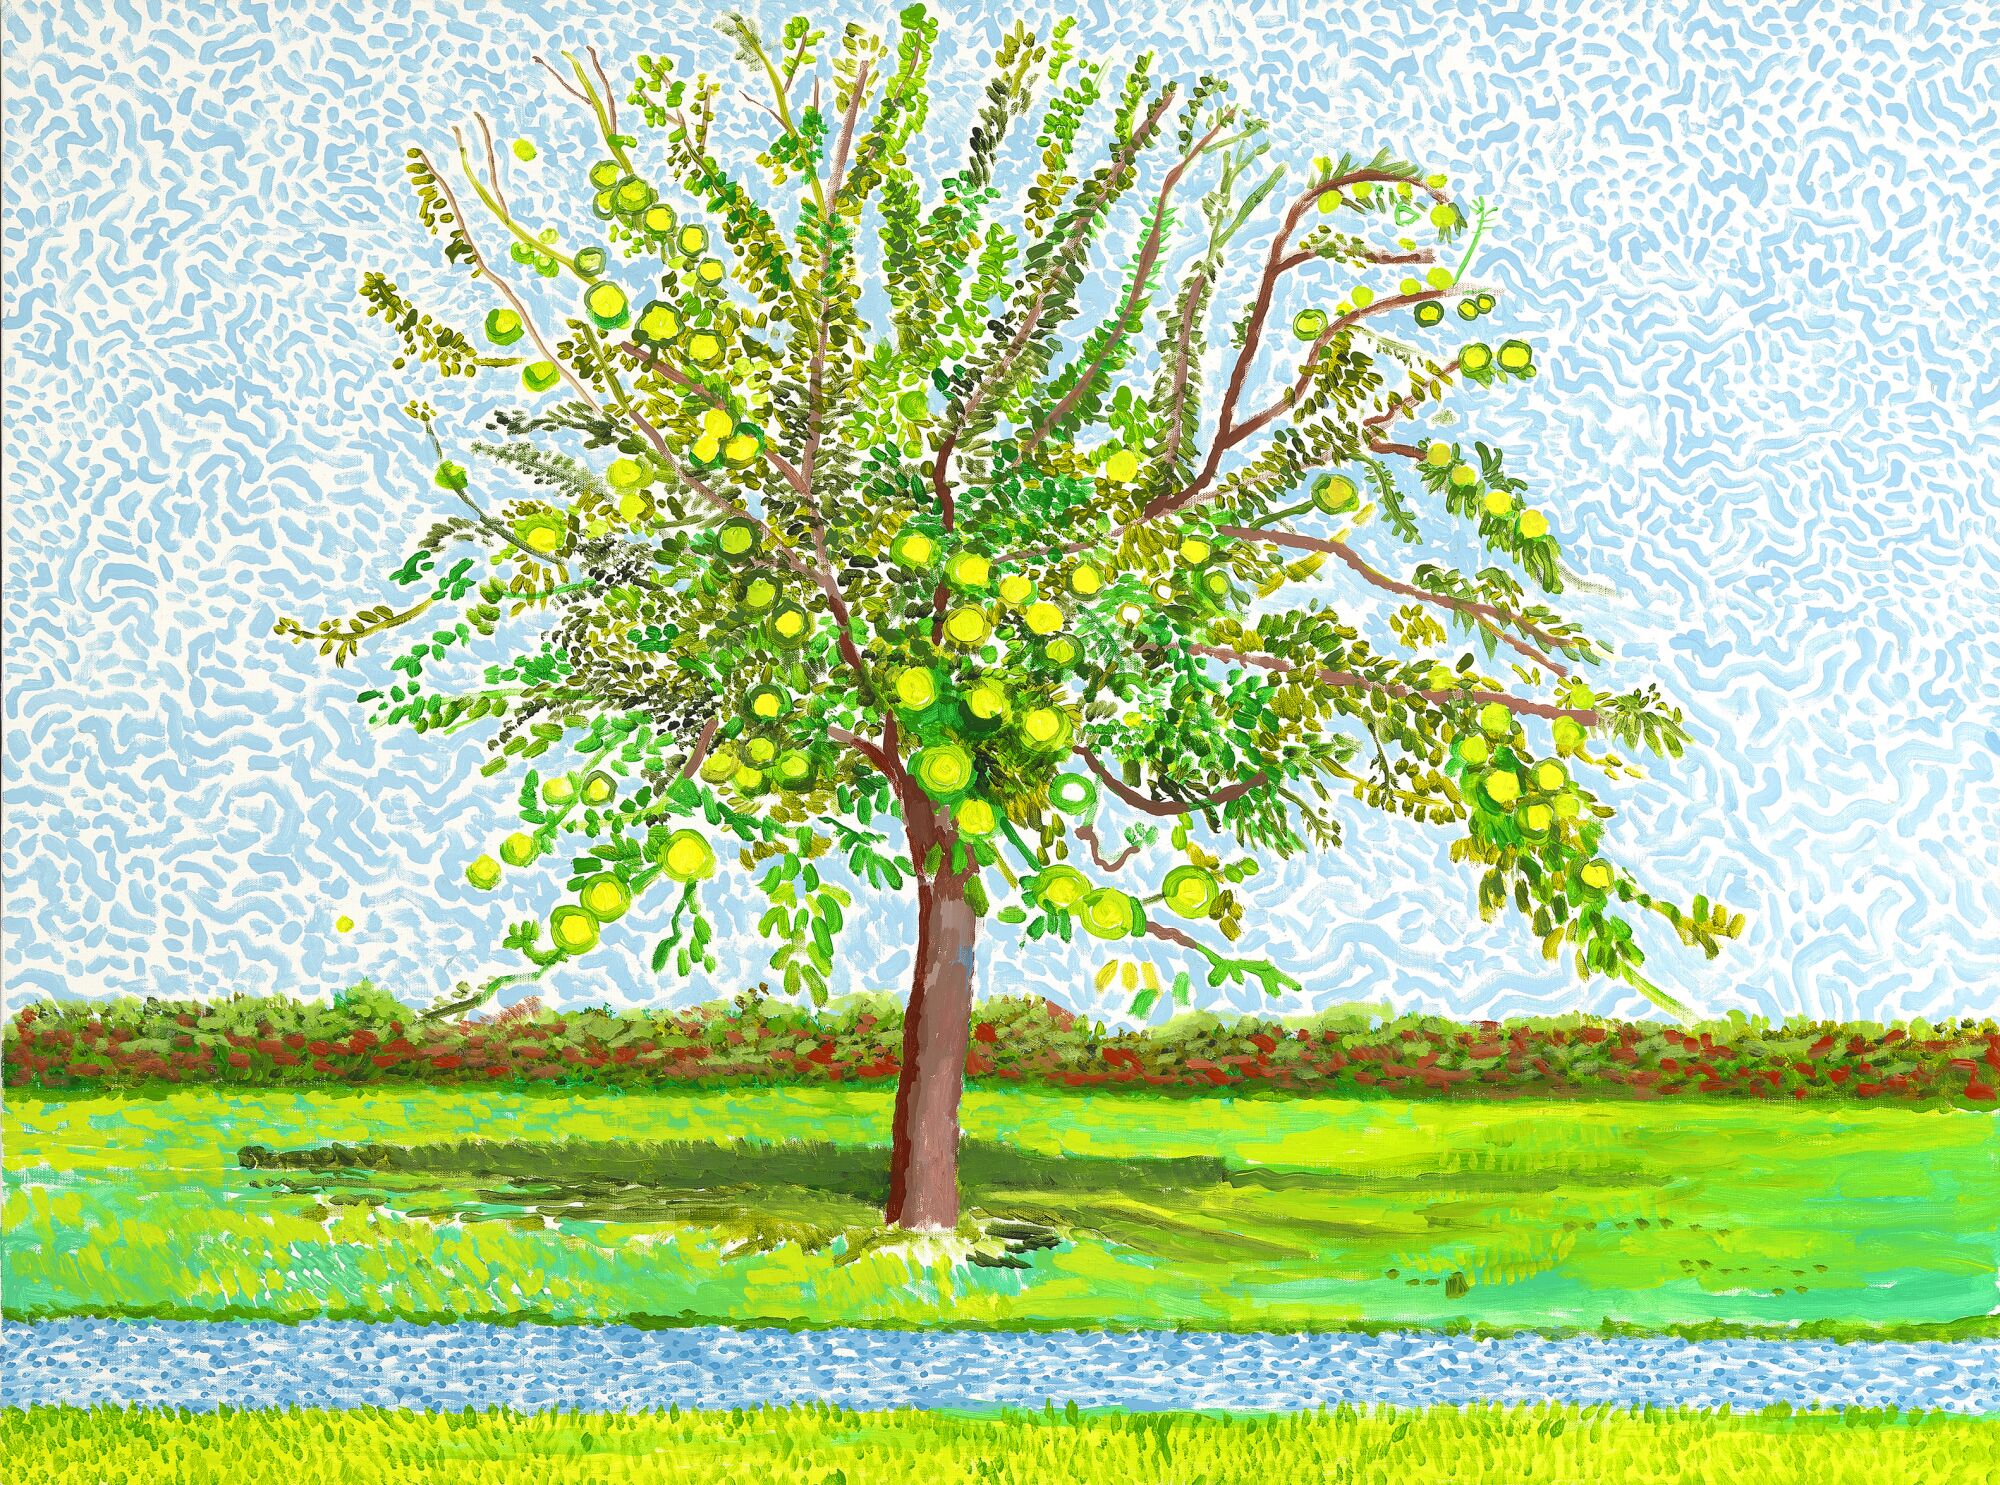 A Hockney work shows a tree covered with leaves and fruit alongside a path.